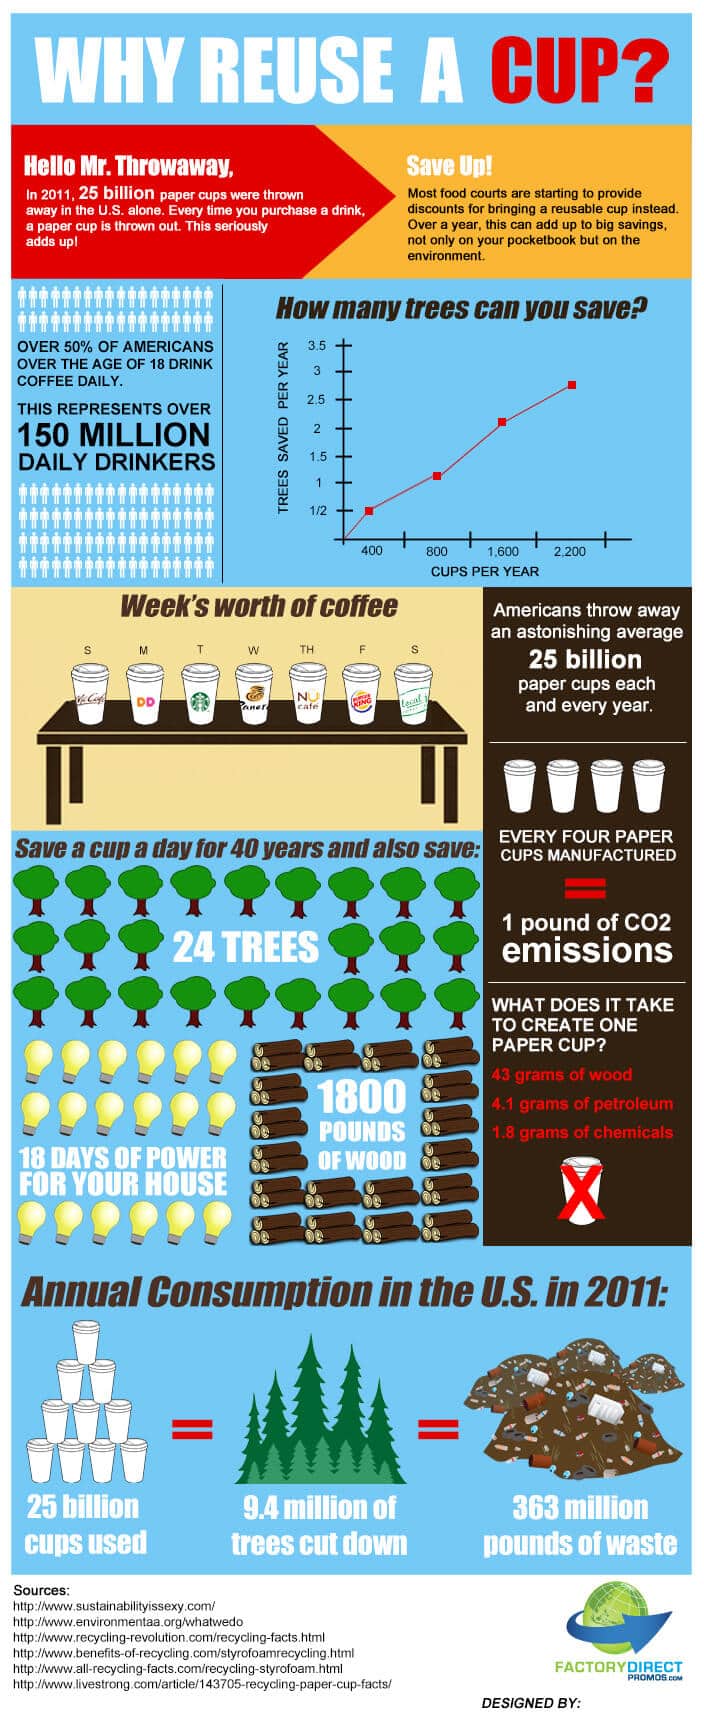 Why Reuse a Cup infographic